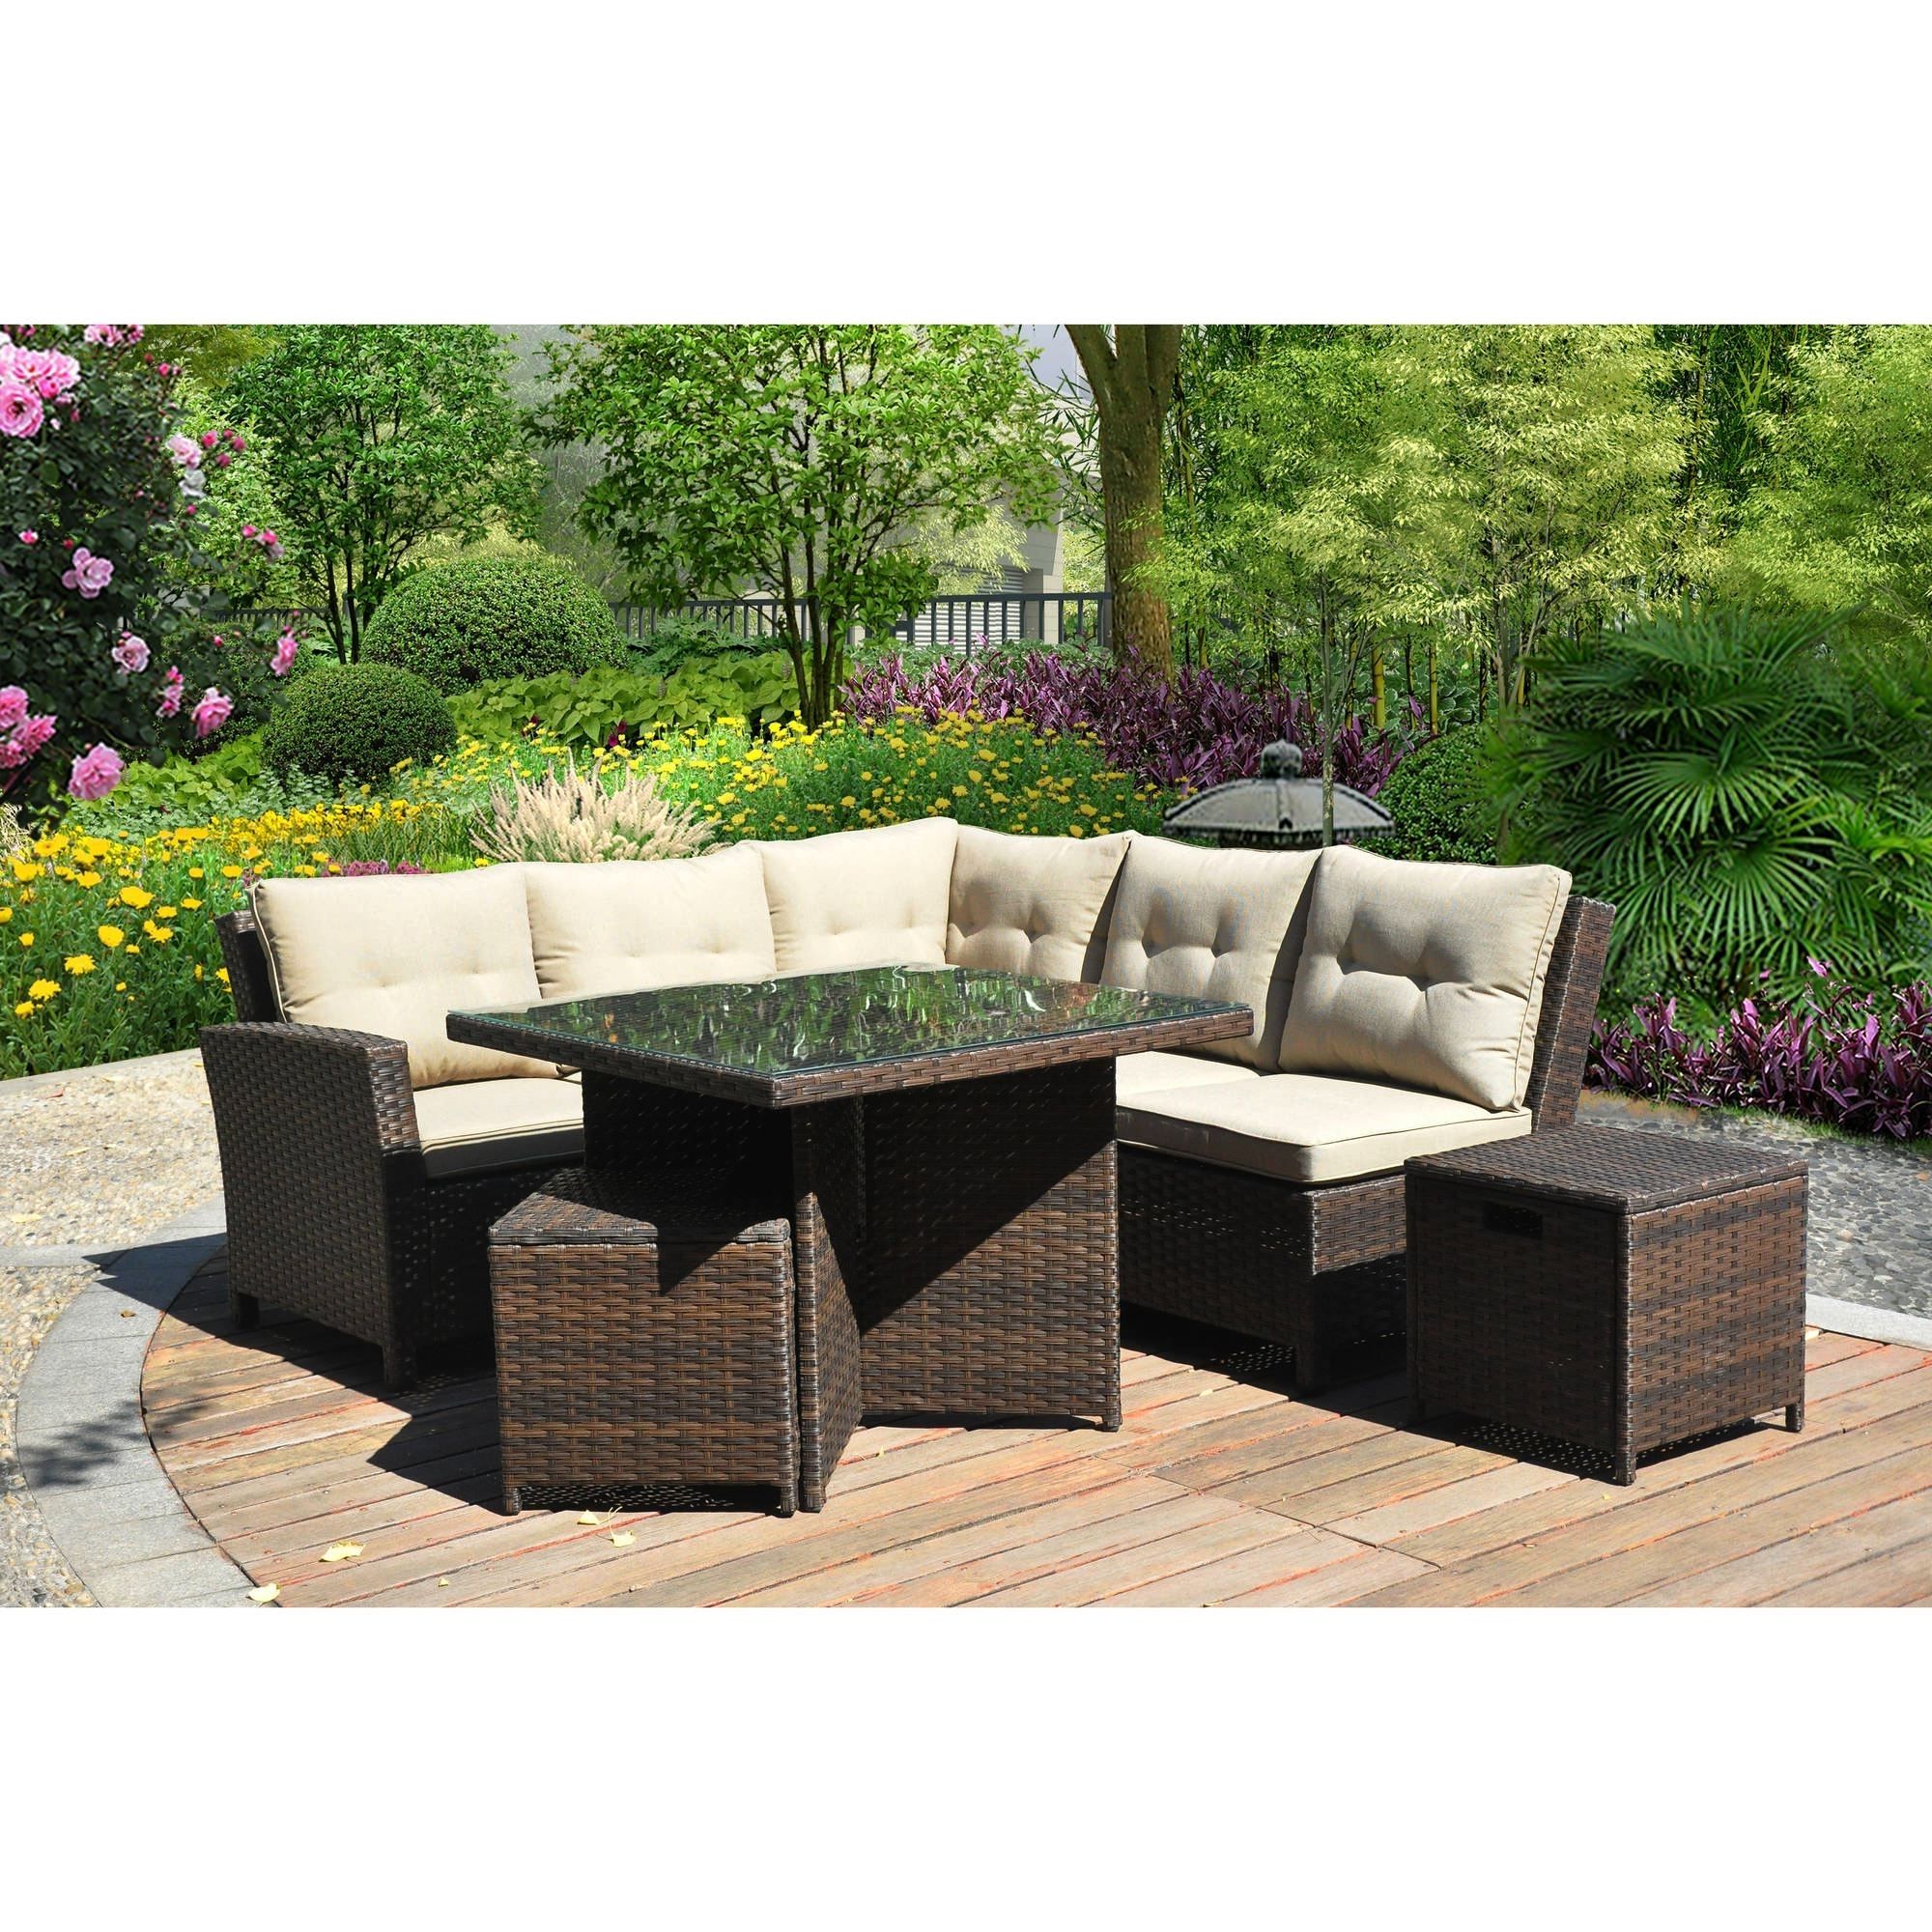 Raleigh Outdoor 5 Piece L Shape Wicker Sectional With Cushions Within Well Known New Orleans Sectional Sofas (View 11 of 15)